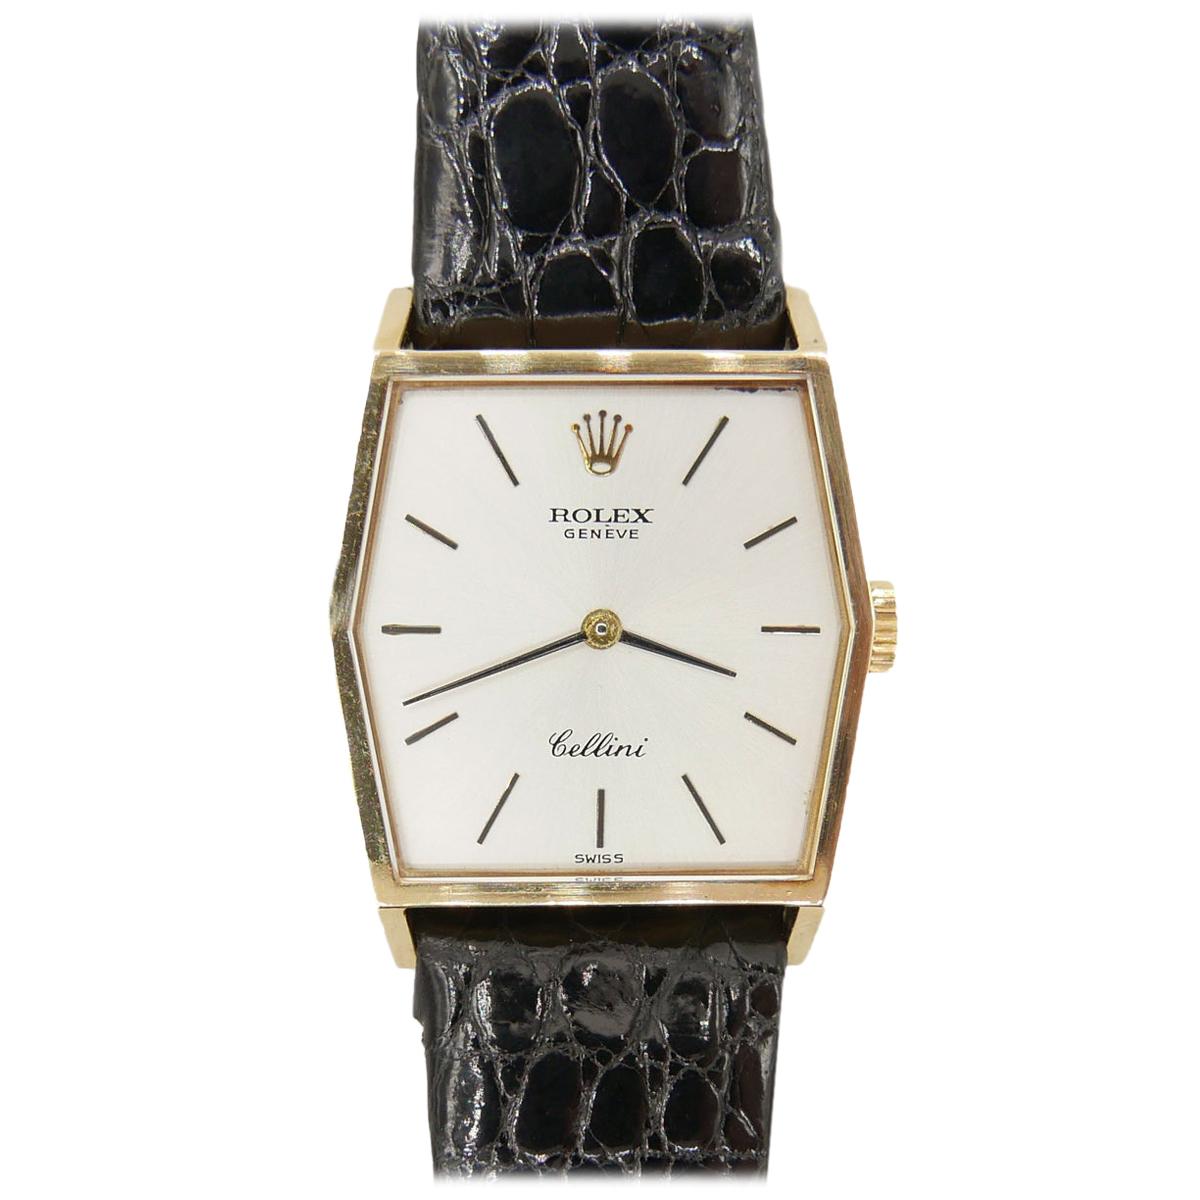 Ladies Rolex Cellini 18 Karat Yellow Gold with Original Box and Papers